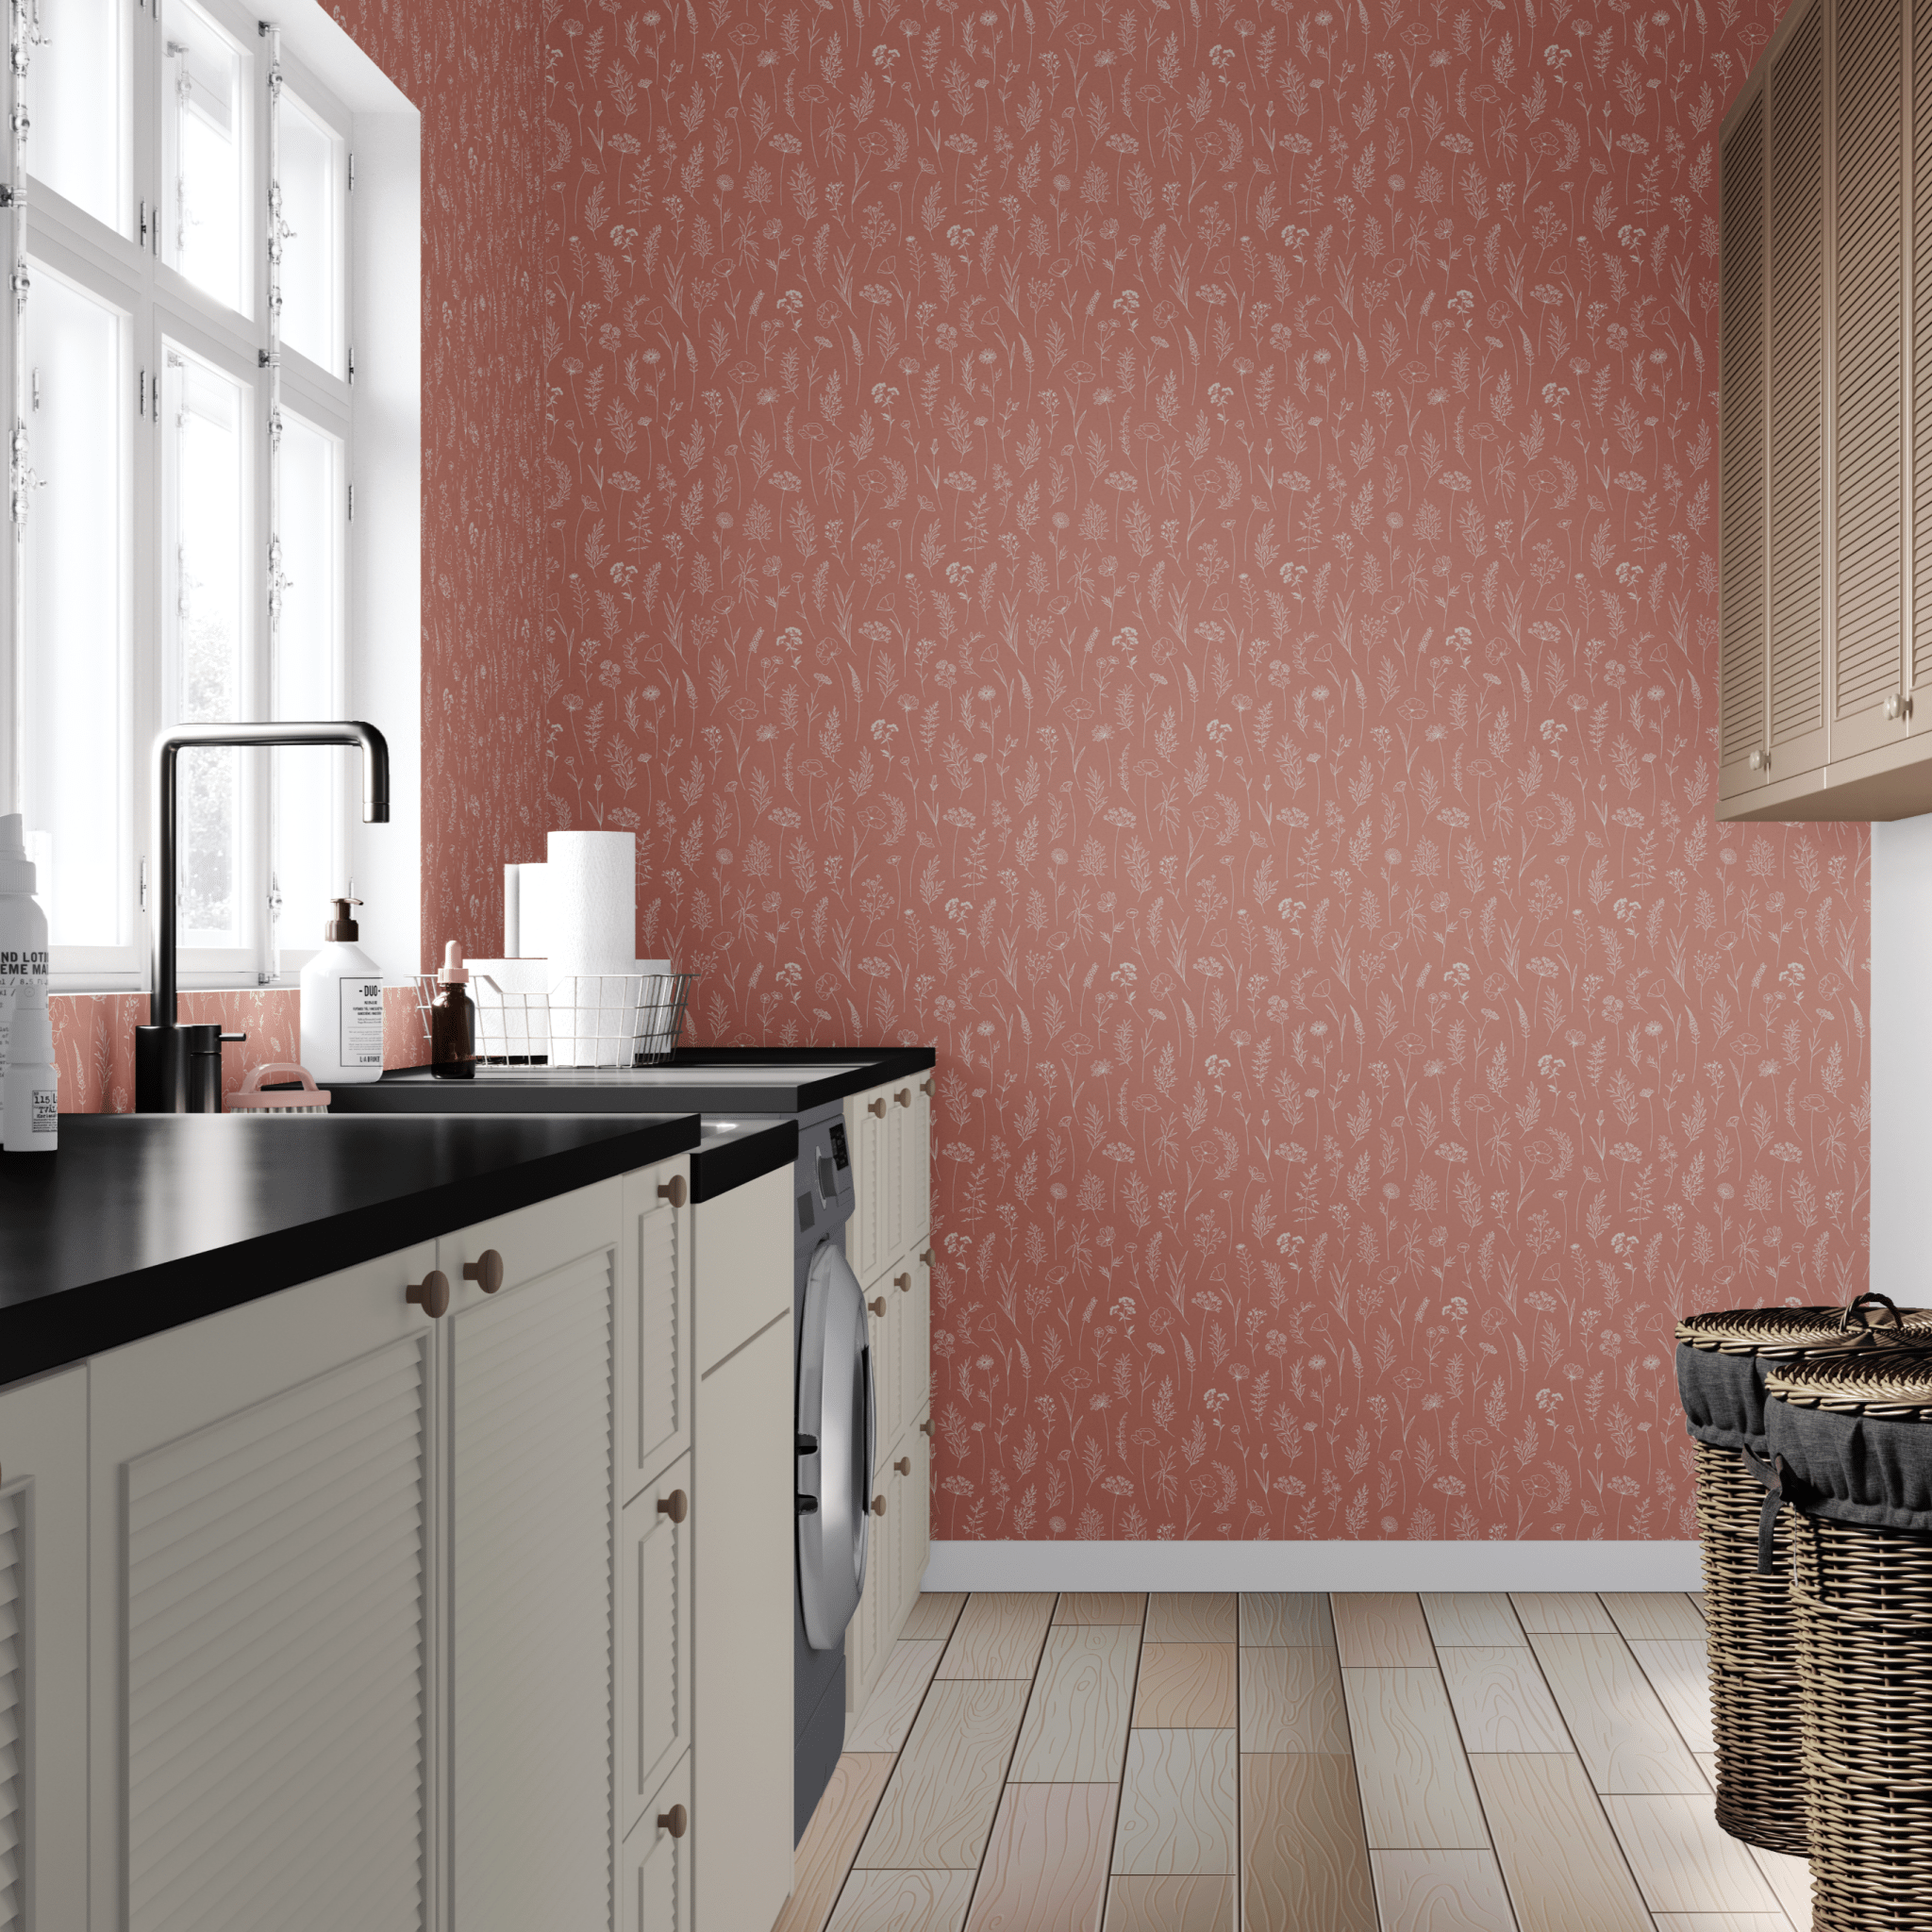 Modern laundry room with a floral terracotta dainty floral wallpaper, contrasting with cream cabinets, black countertops,